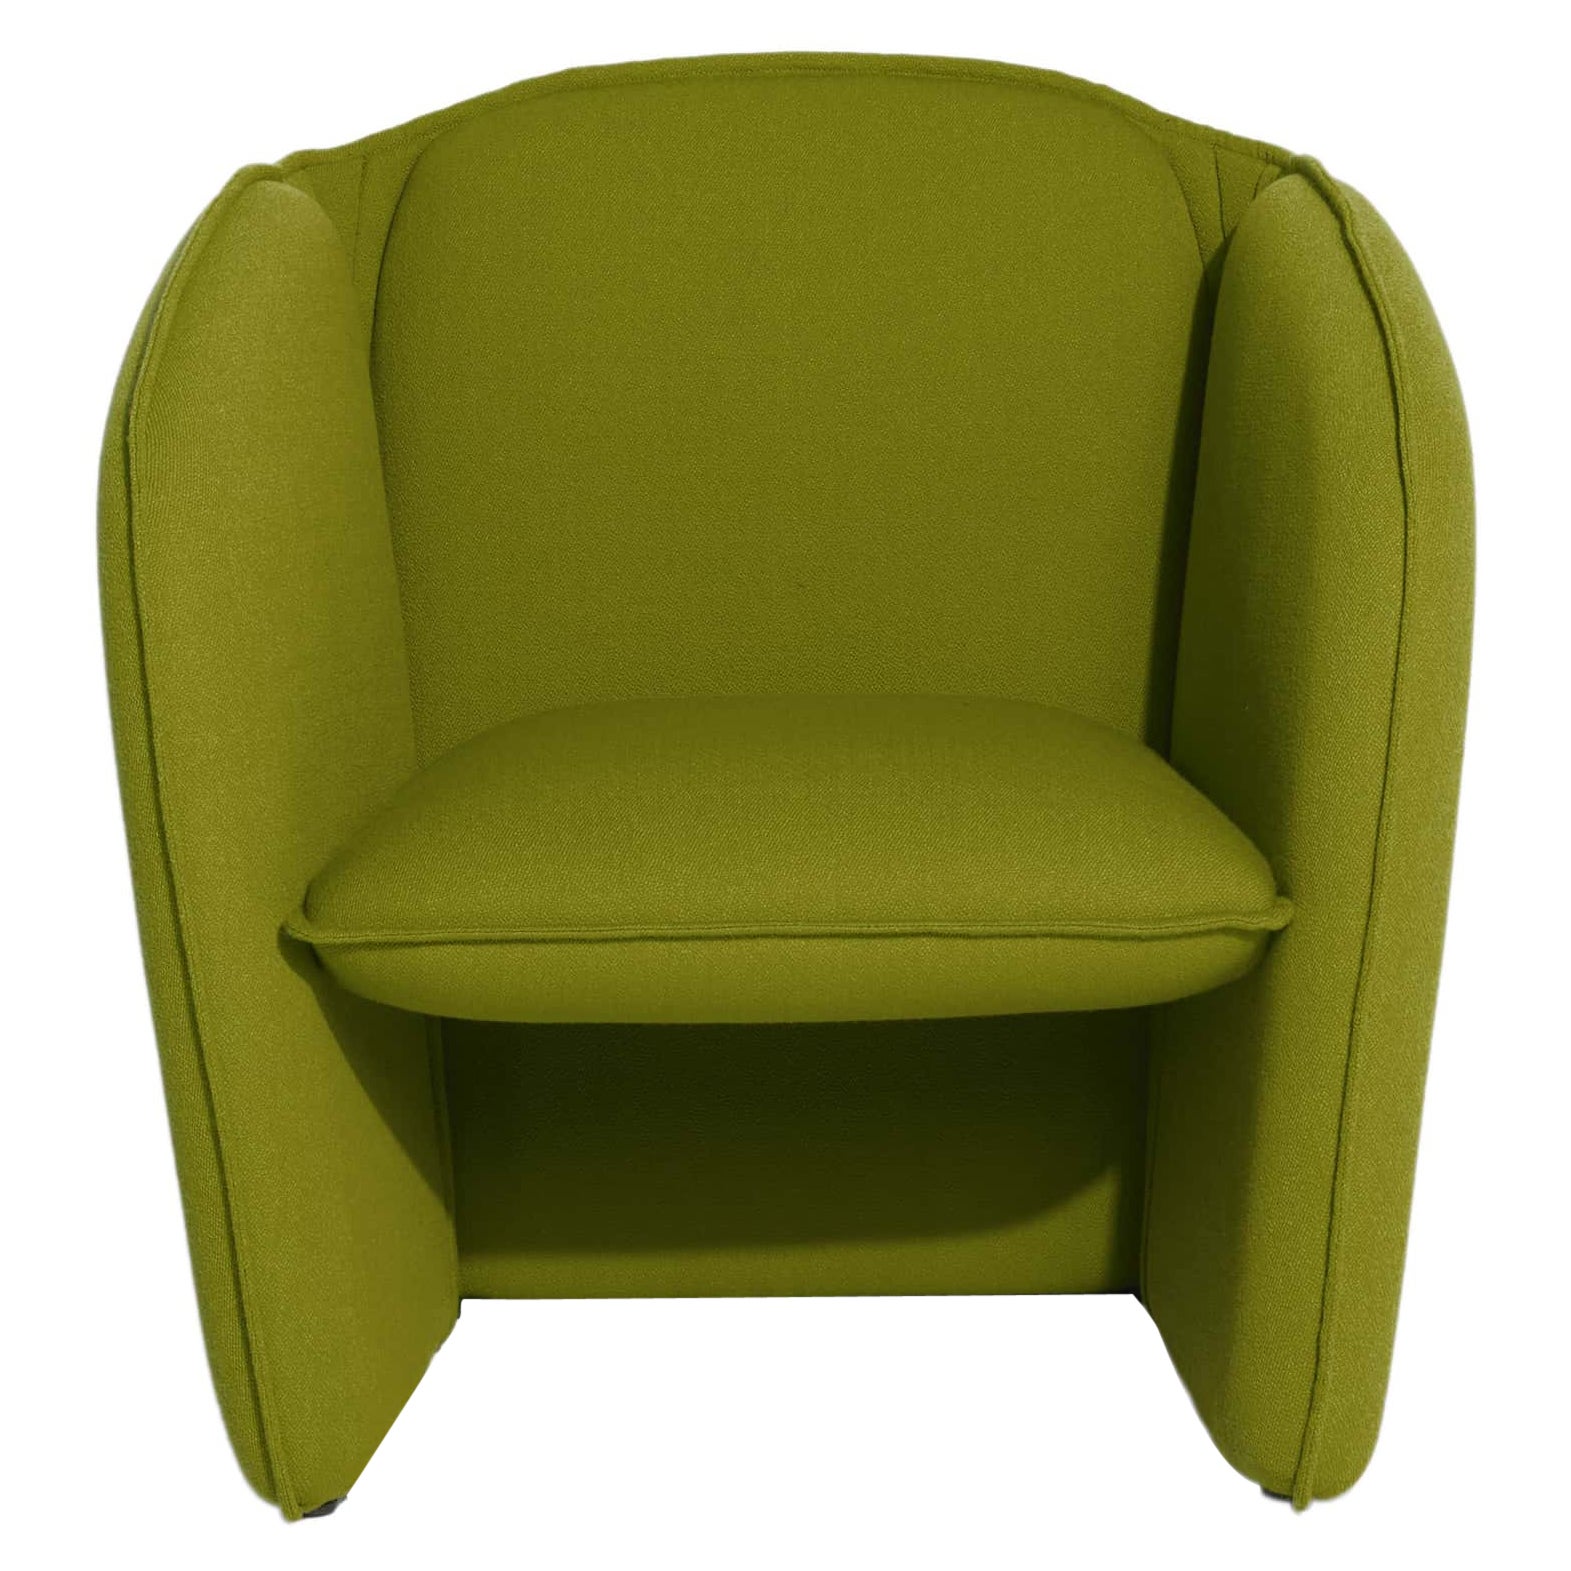 Petite Friture Lily Armchair in Olive Green by Färg & Blanche, 2022